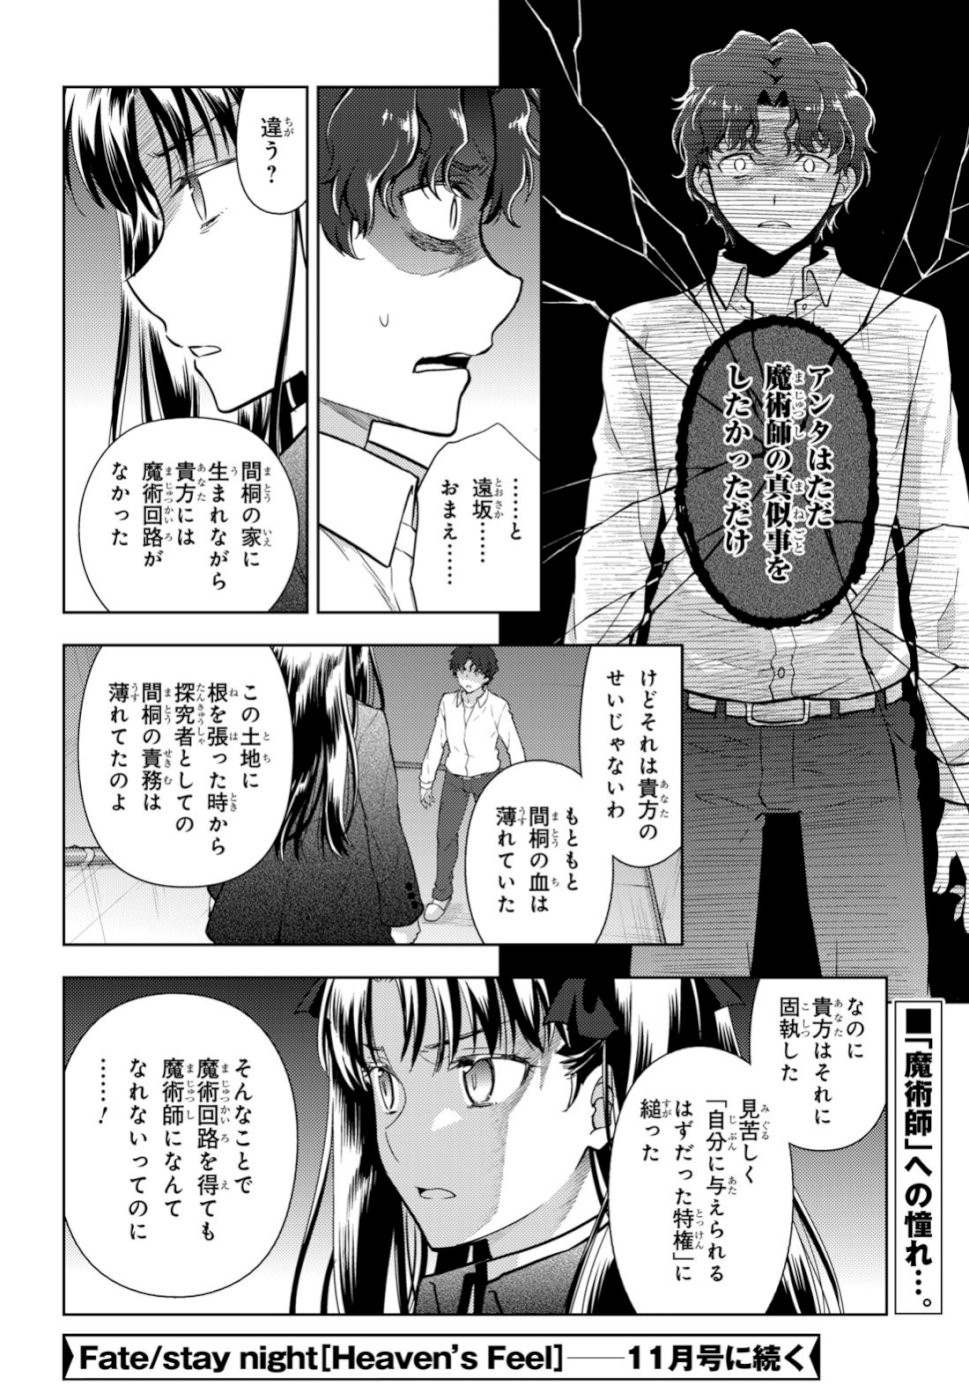 Fate/Stay night Heaven's Feel - Chapter 51 - Page 14